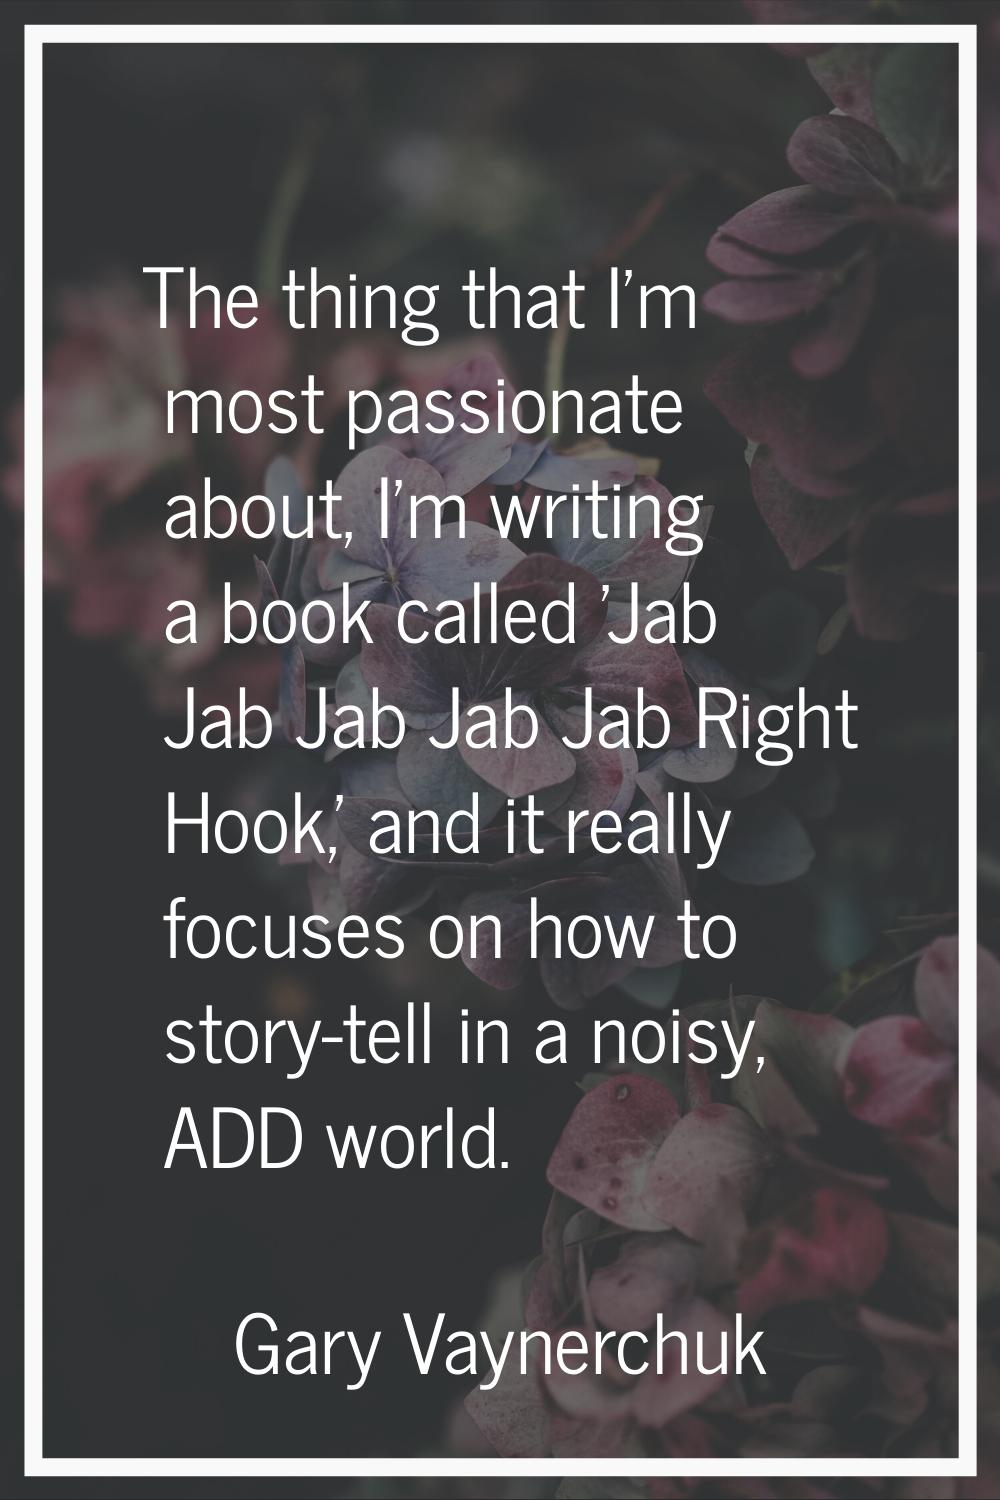 The thing that I'm most passionate about, I'm writing a book called 'Jab Jab Jab Jab Jab Right Hook